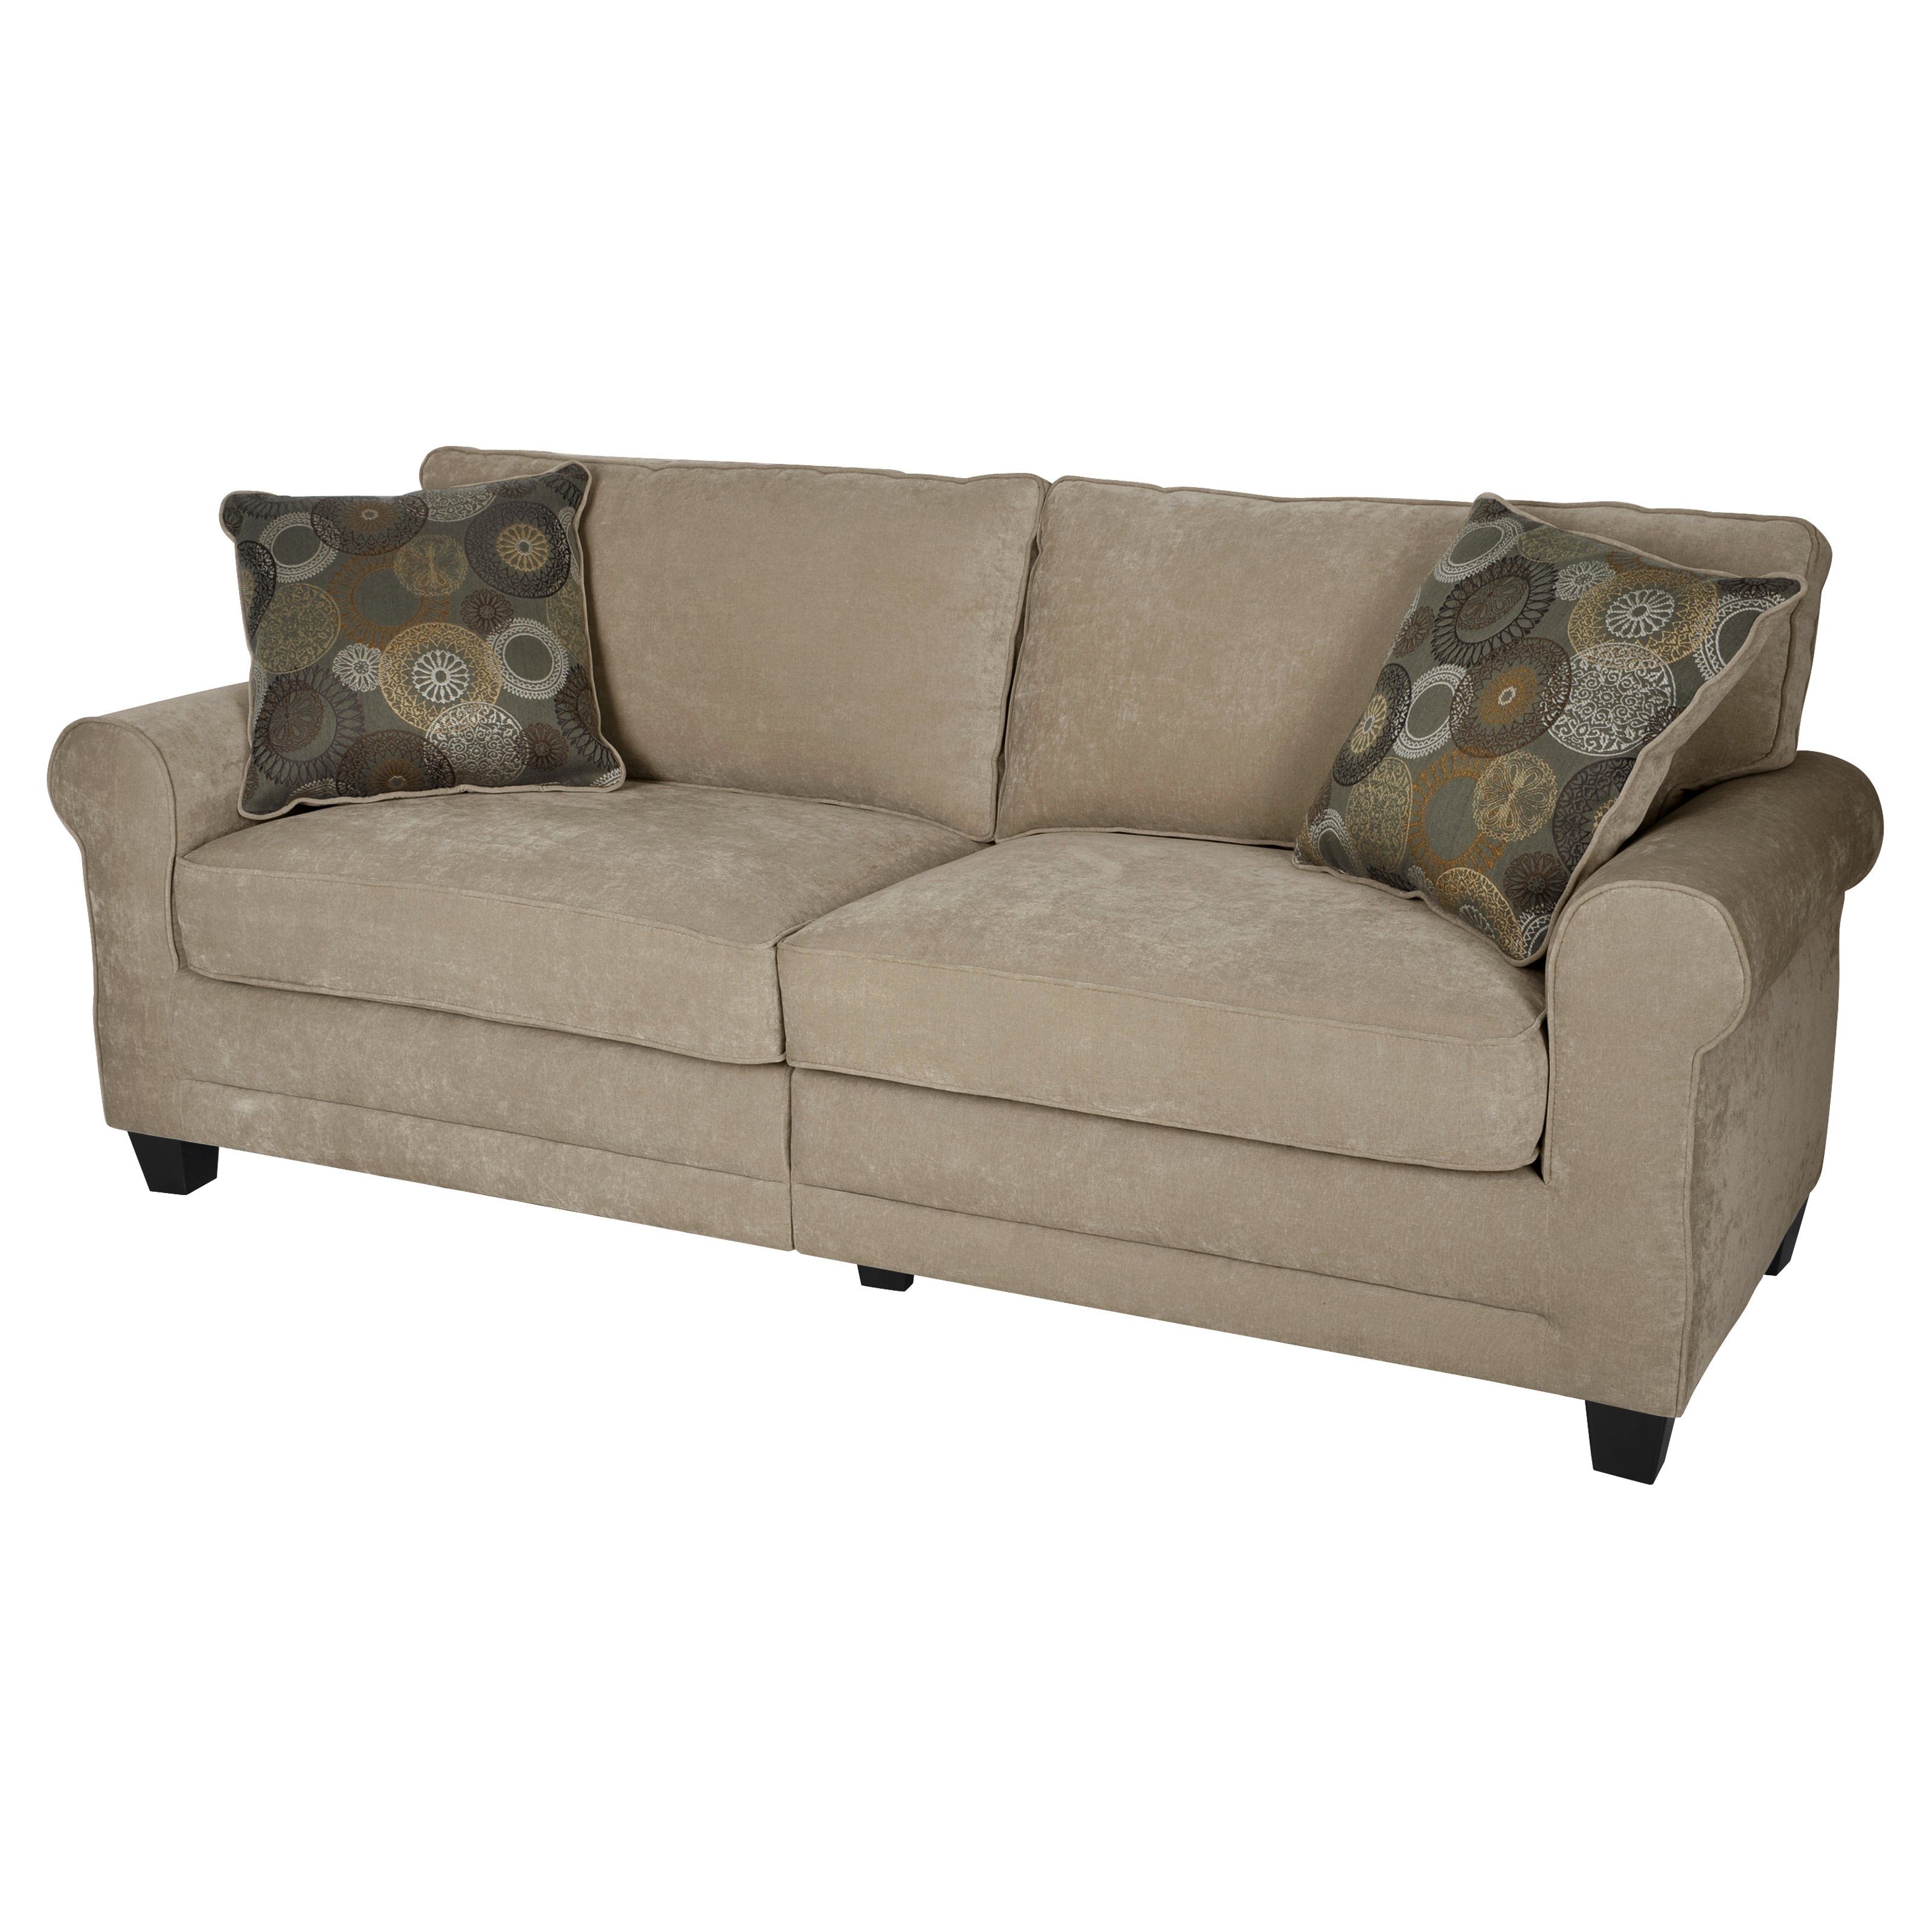 Serta Copenhagen Collection 78 In. Sofa | Hayneedle Intended For Modern Outdoor String Lights At Wayfair (Photo 5 of 15)